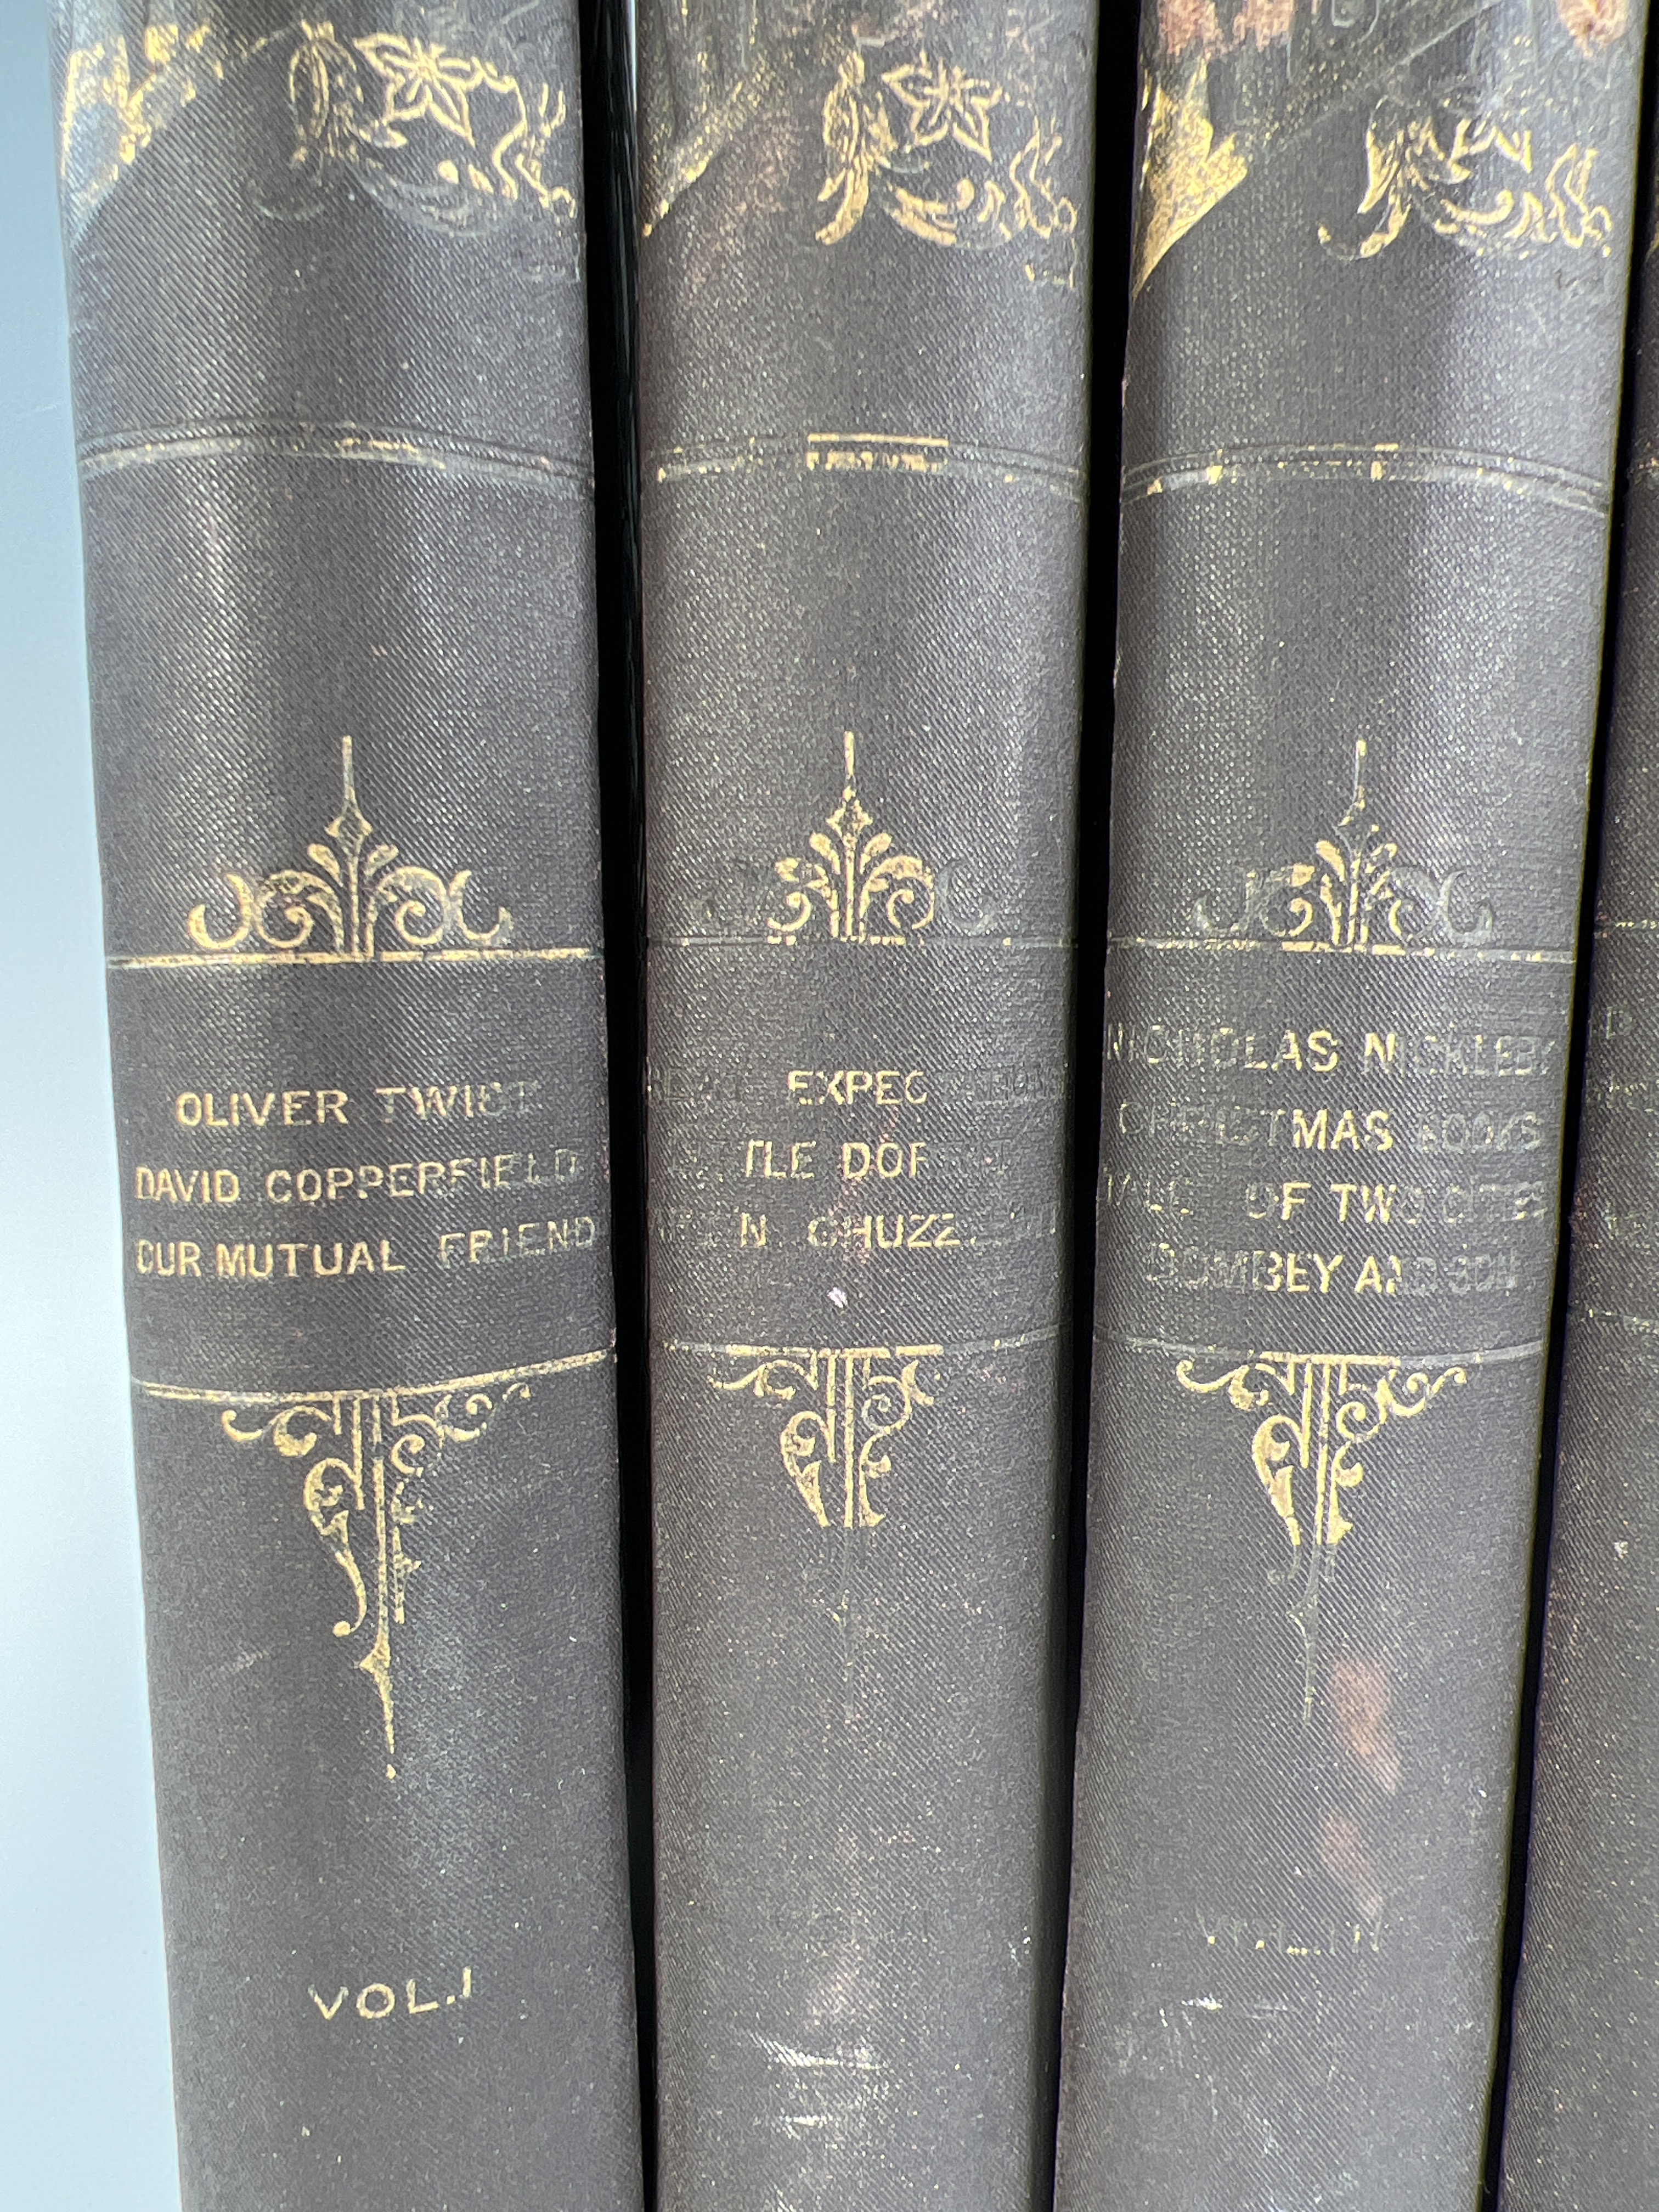 6 Vol Colliers Unabridged Ed The Works Of Charles Dickens image 2